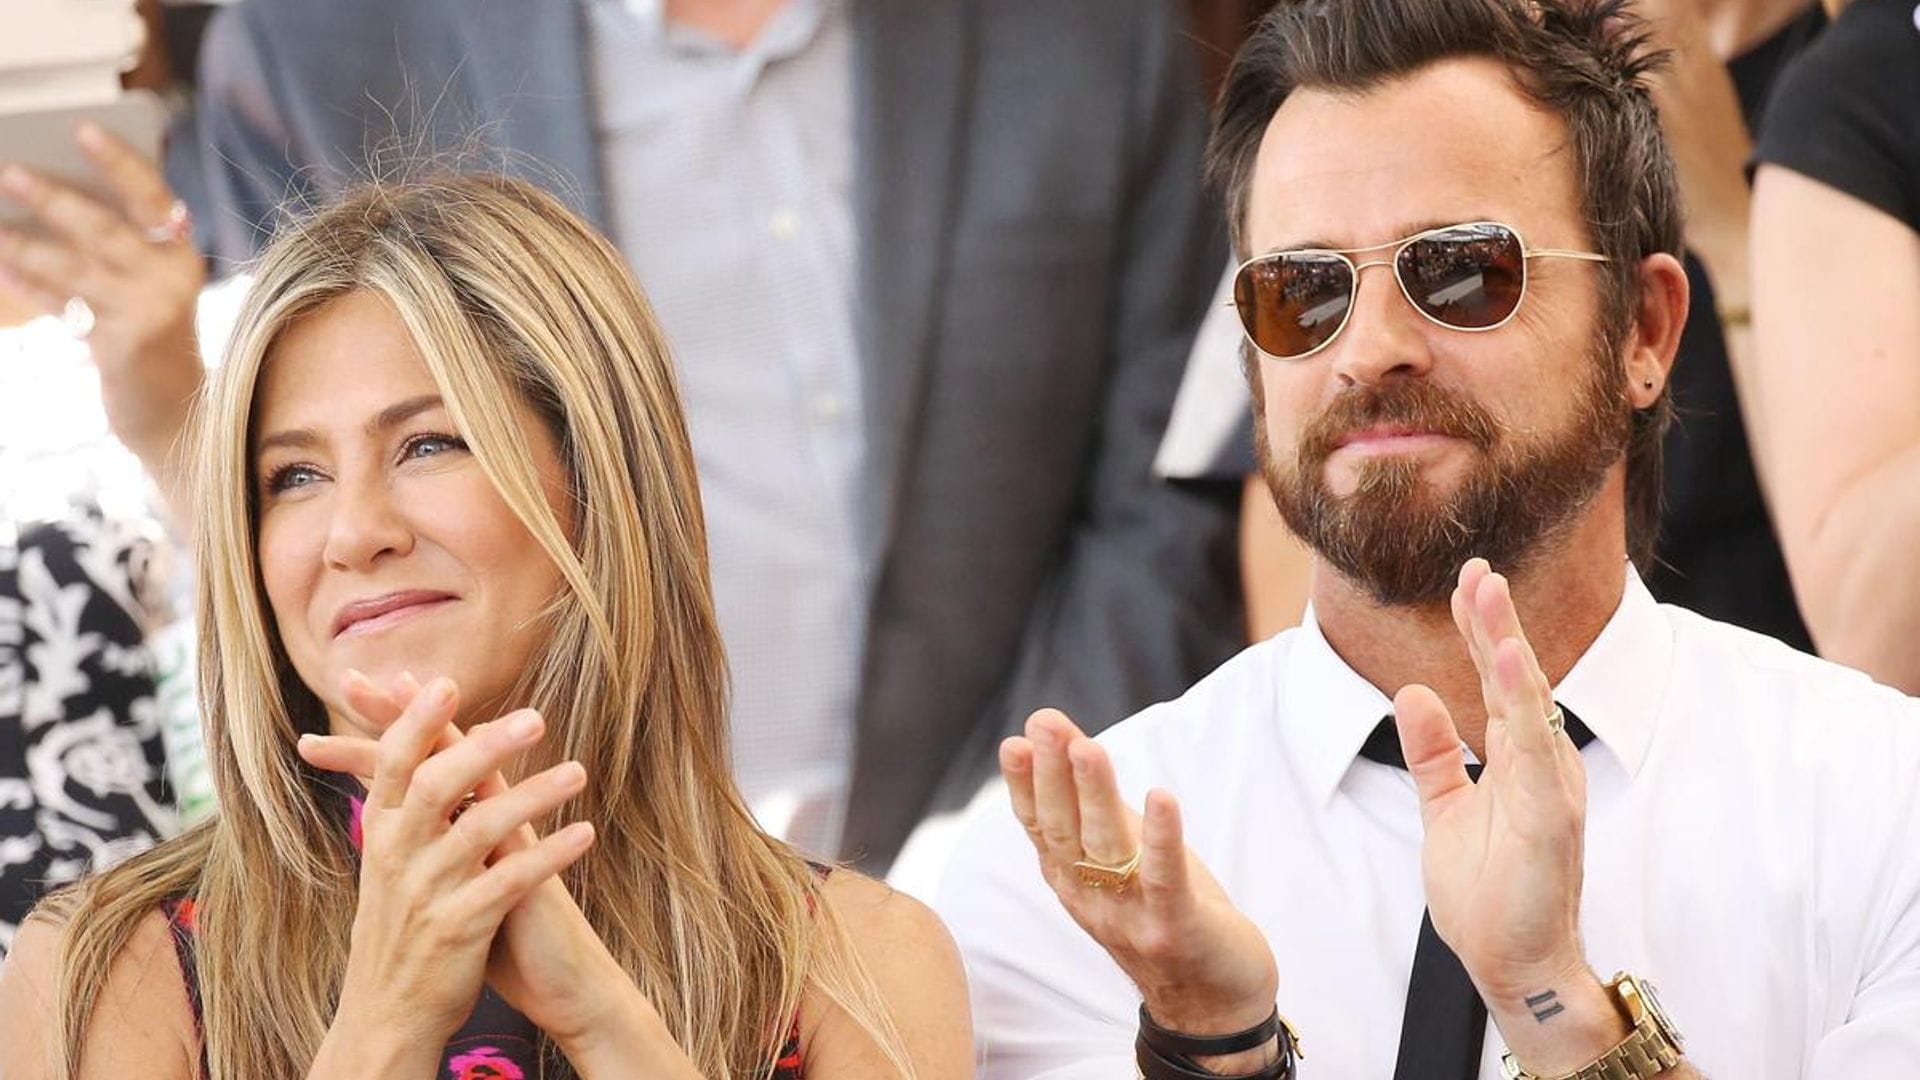 Jennifer Aniston has relied on ex Justin Theroux following her dad’s death: Report